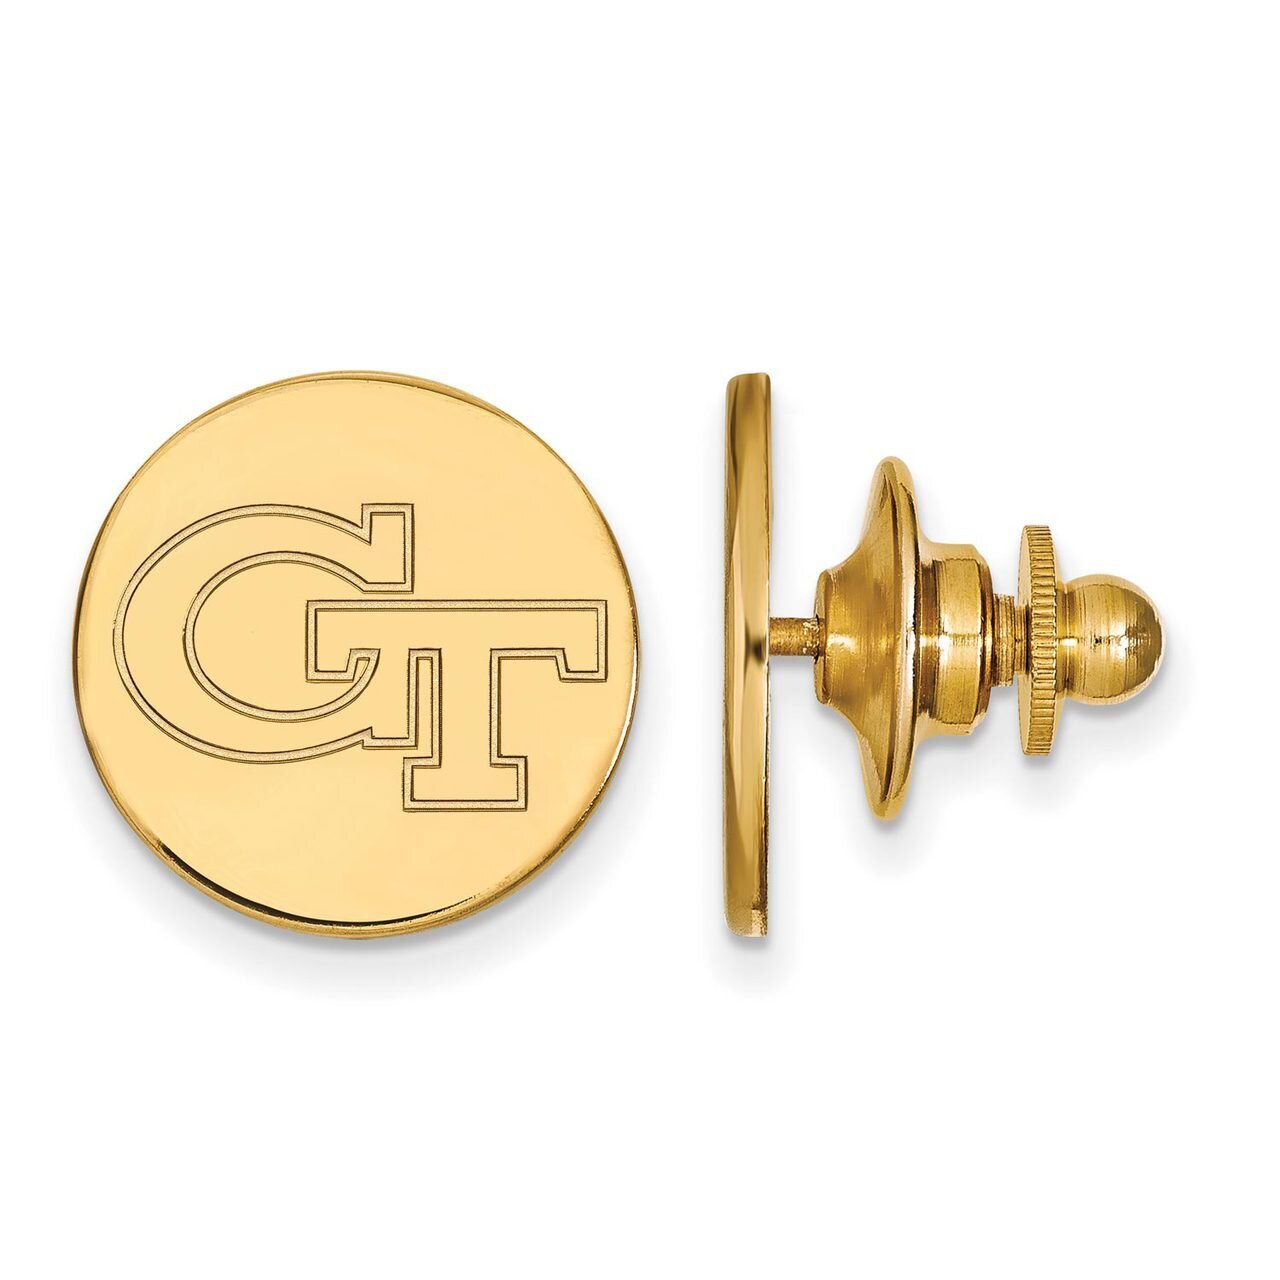 Georgia Institute of Technology Lapel Pin Gold-plated Silver GP062GT